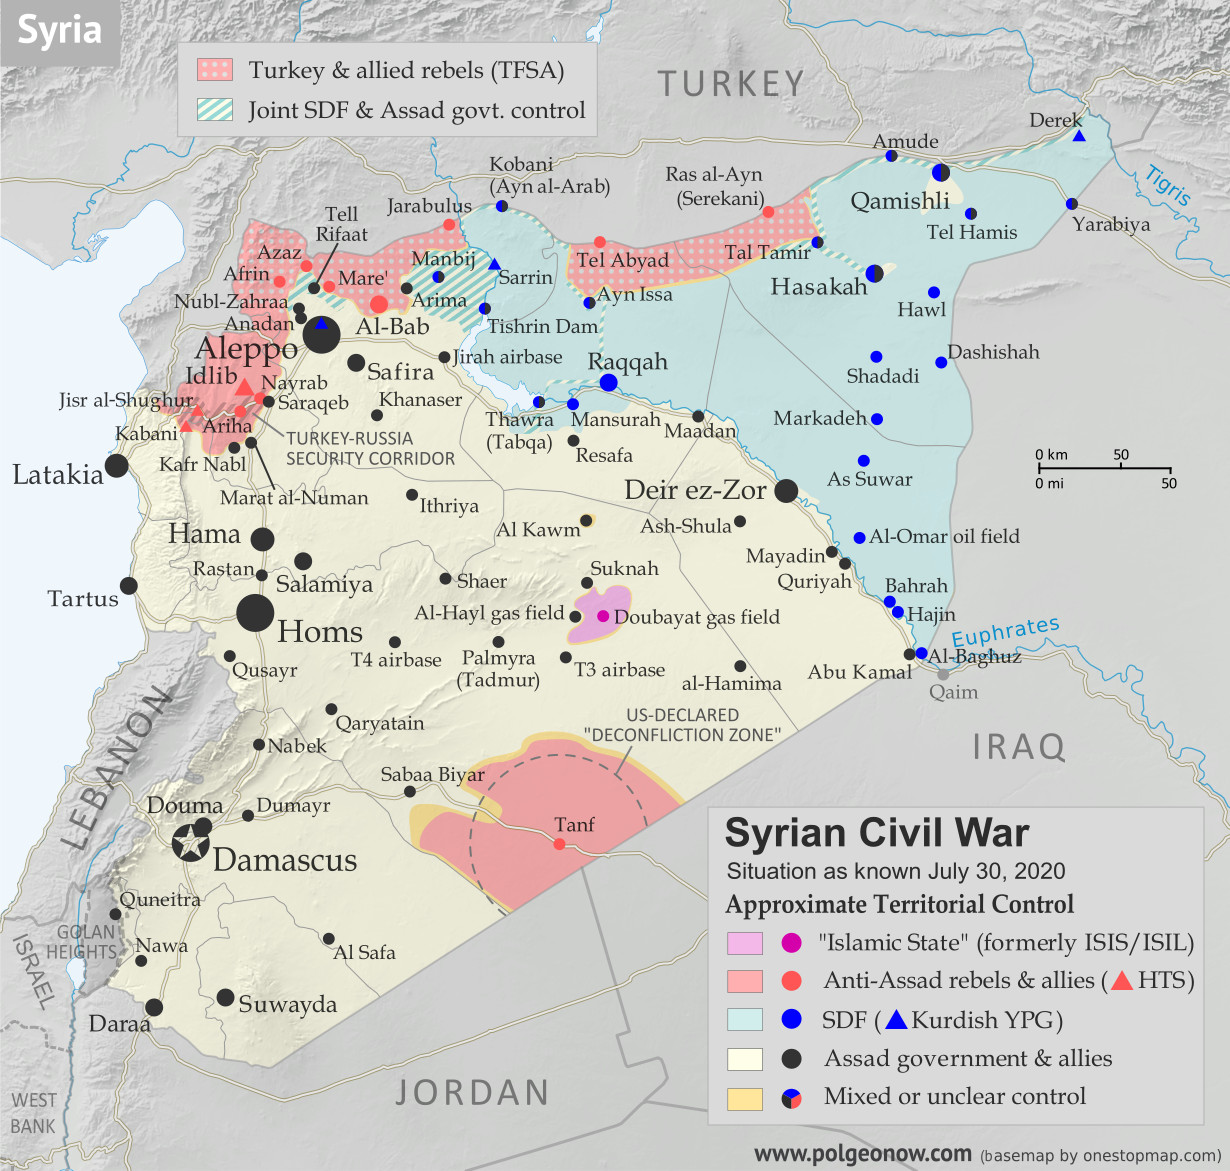 Syrian Civil War map: Territorial control in Syria in late July 2020 (Free Syrian Army rebels, Kurdish YPG, Syrian Democratic Forces (SDF), Hayat Tahrir al-Sham (HTS / Al-Nusra Front), Islamic State (ISIS/ISIL), and others). Includes Turkish/TFSA control, joint SDF-Assad control, US deconfliction zone, and Turkey-Russia security corridor, plus recent locations of conflict and territorial control changes, including Suknah, Abu Kamal, Idlib, and more. Colorblind accessible.